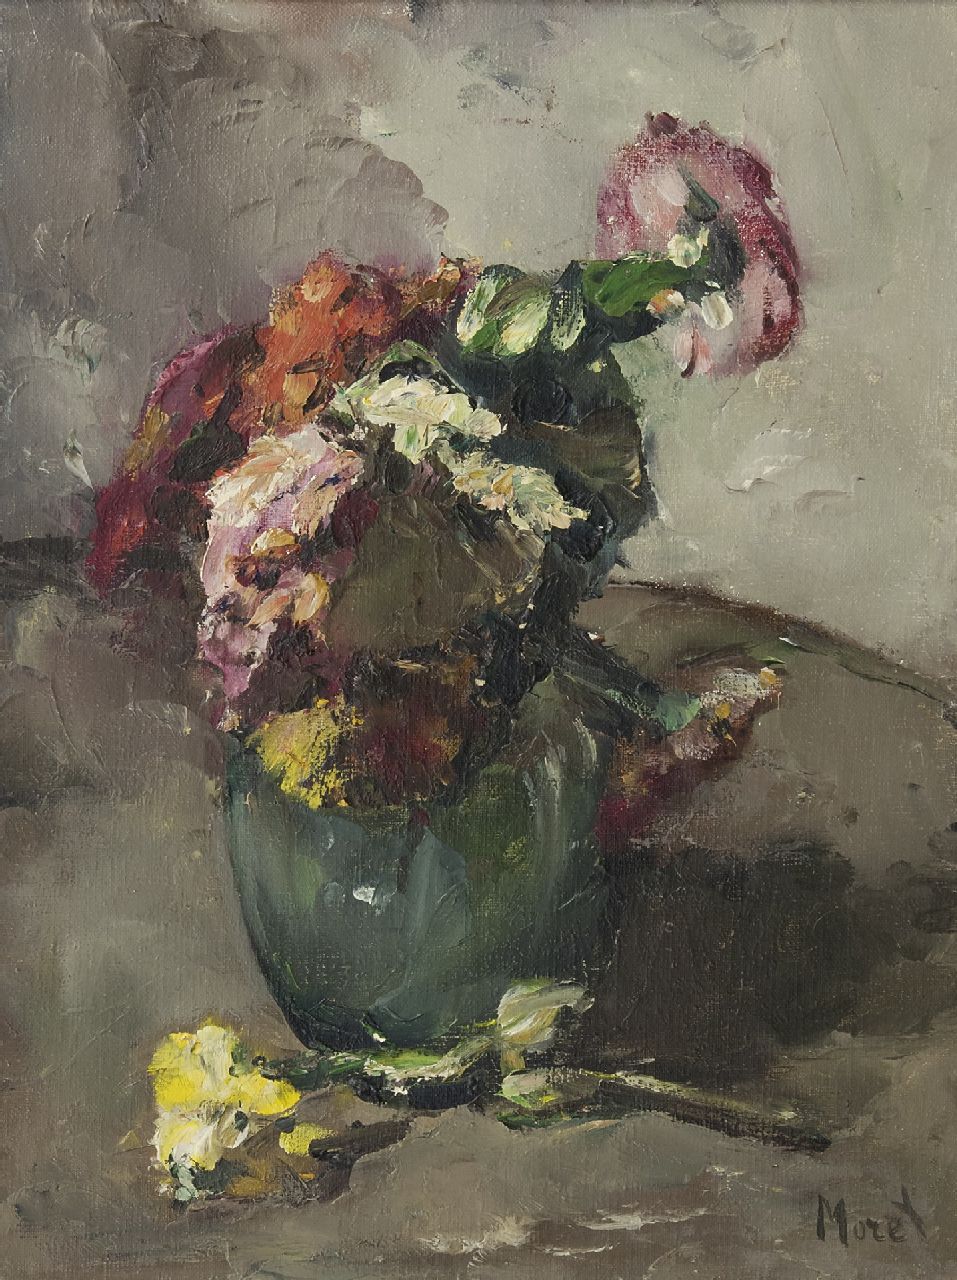 Moret C.S.A.  | Christina Sophia Antonia 'Christine' Moret | Paintings offered for sale | A flower still life, oil on canvas 40.0 x 30.4 cm, signed l.r.